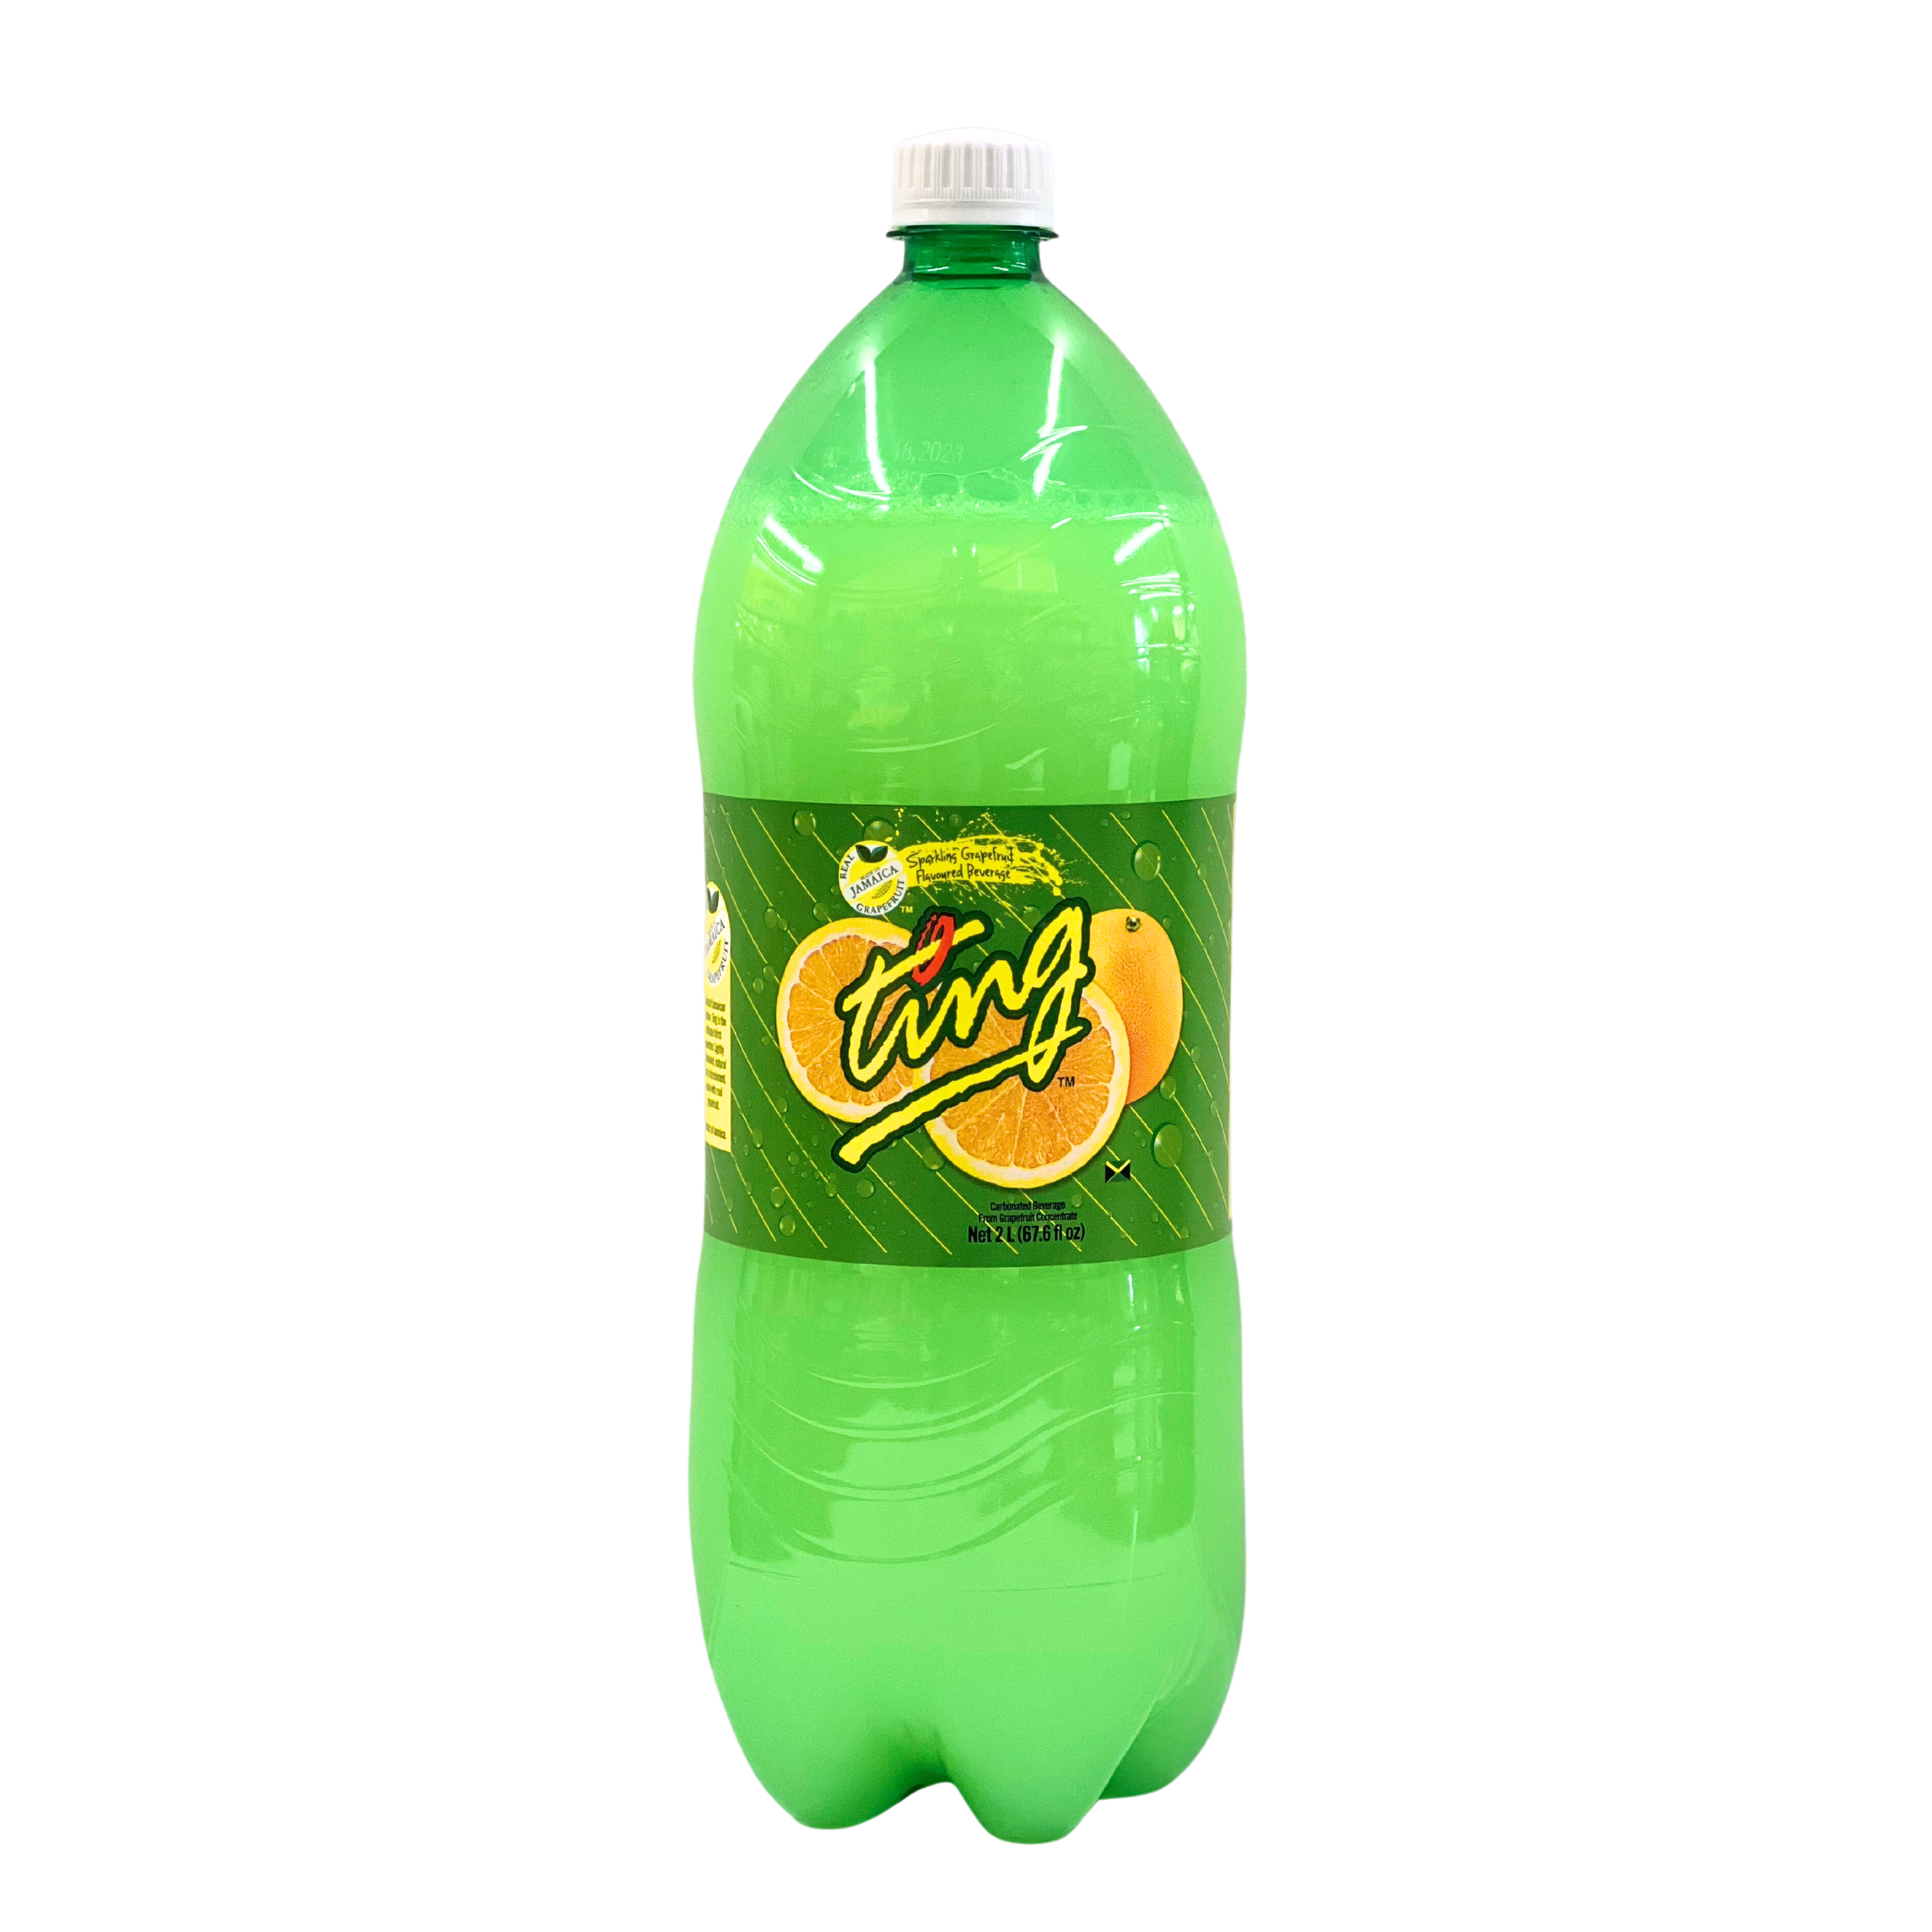 Ting 2L Pop Product Of Jamaica